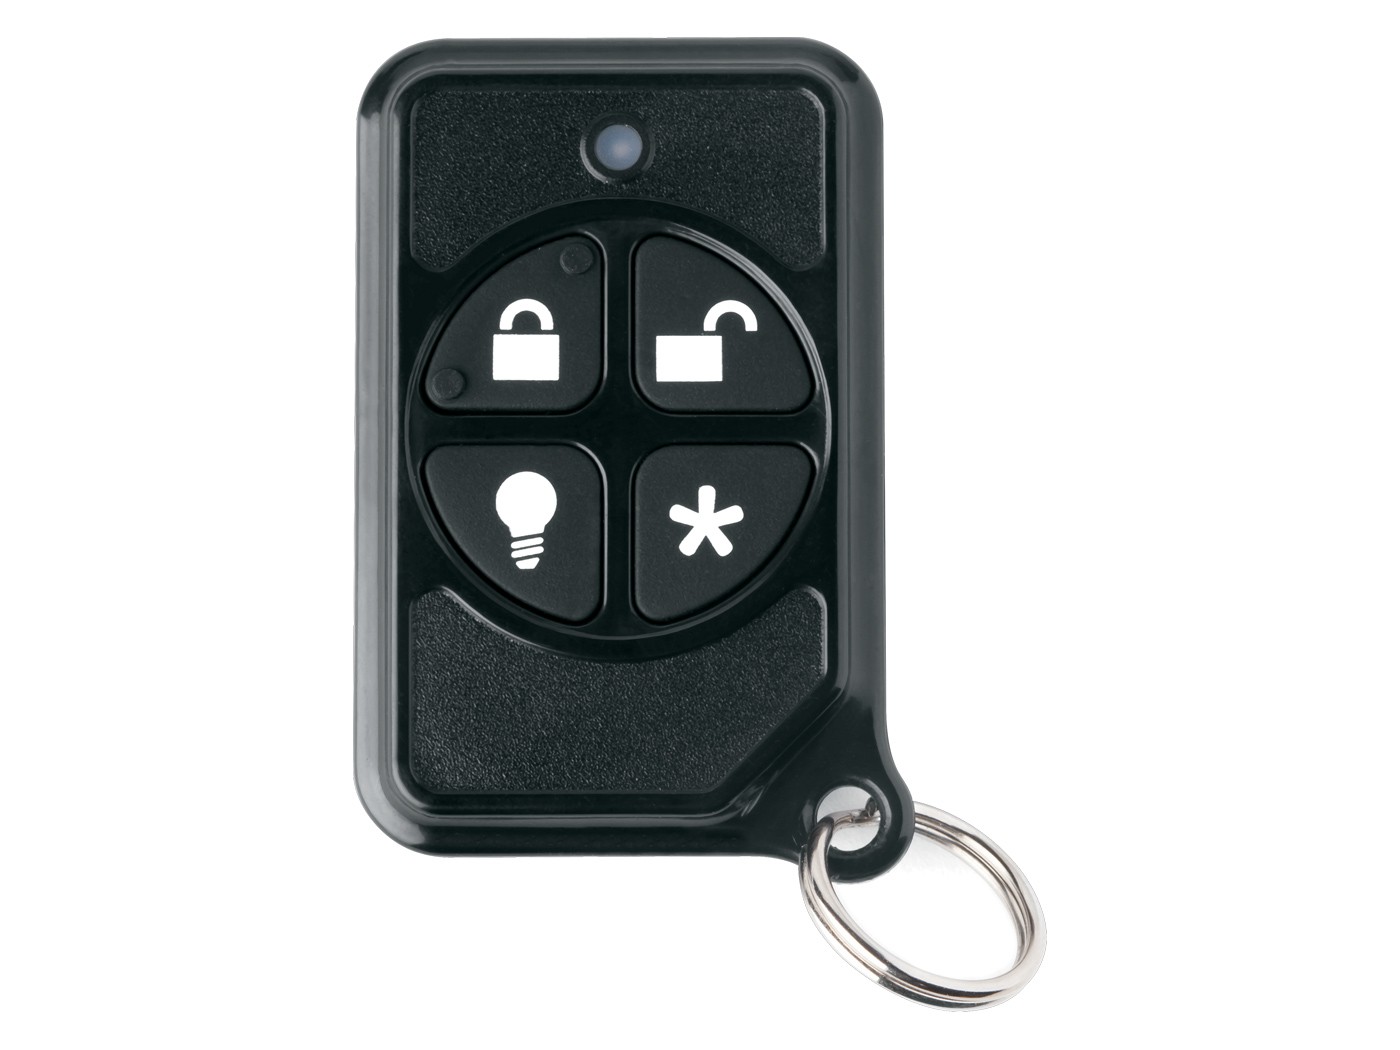 A 4-button keychain remote for a wireless security system.